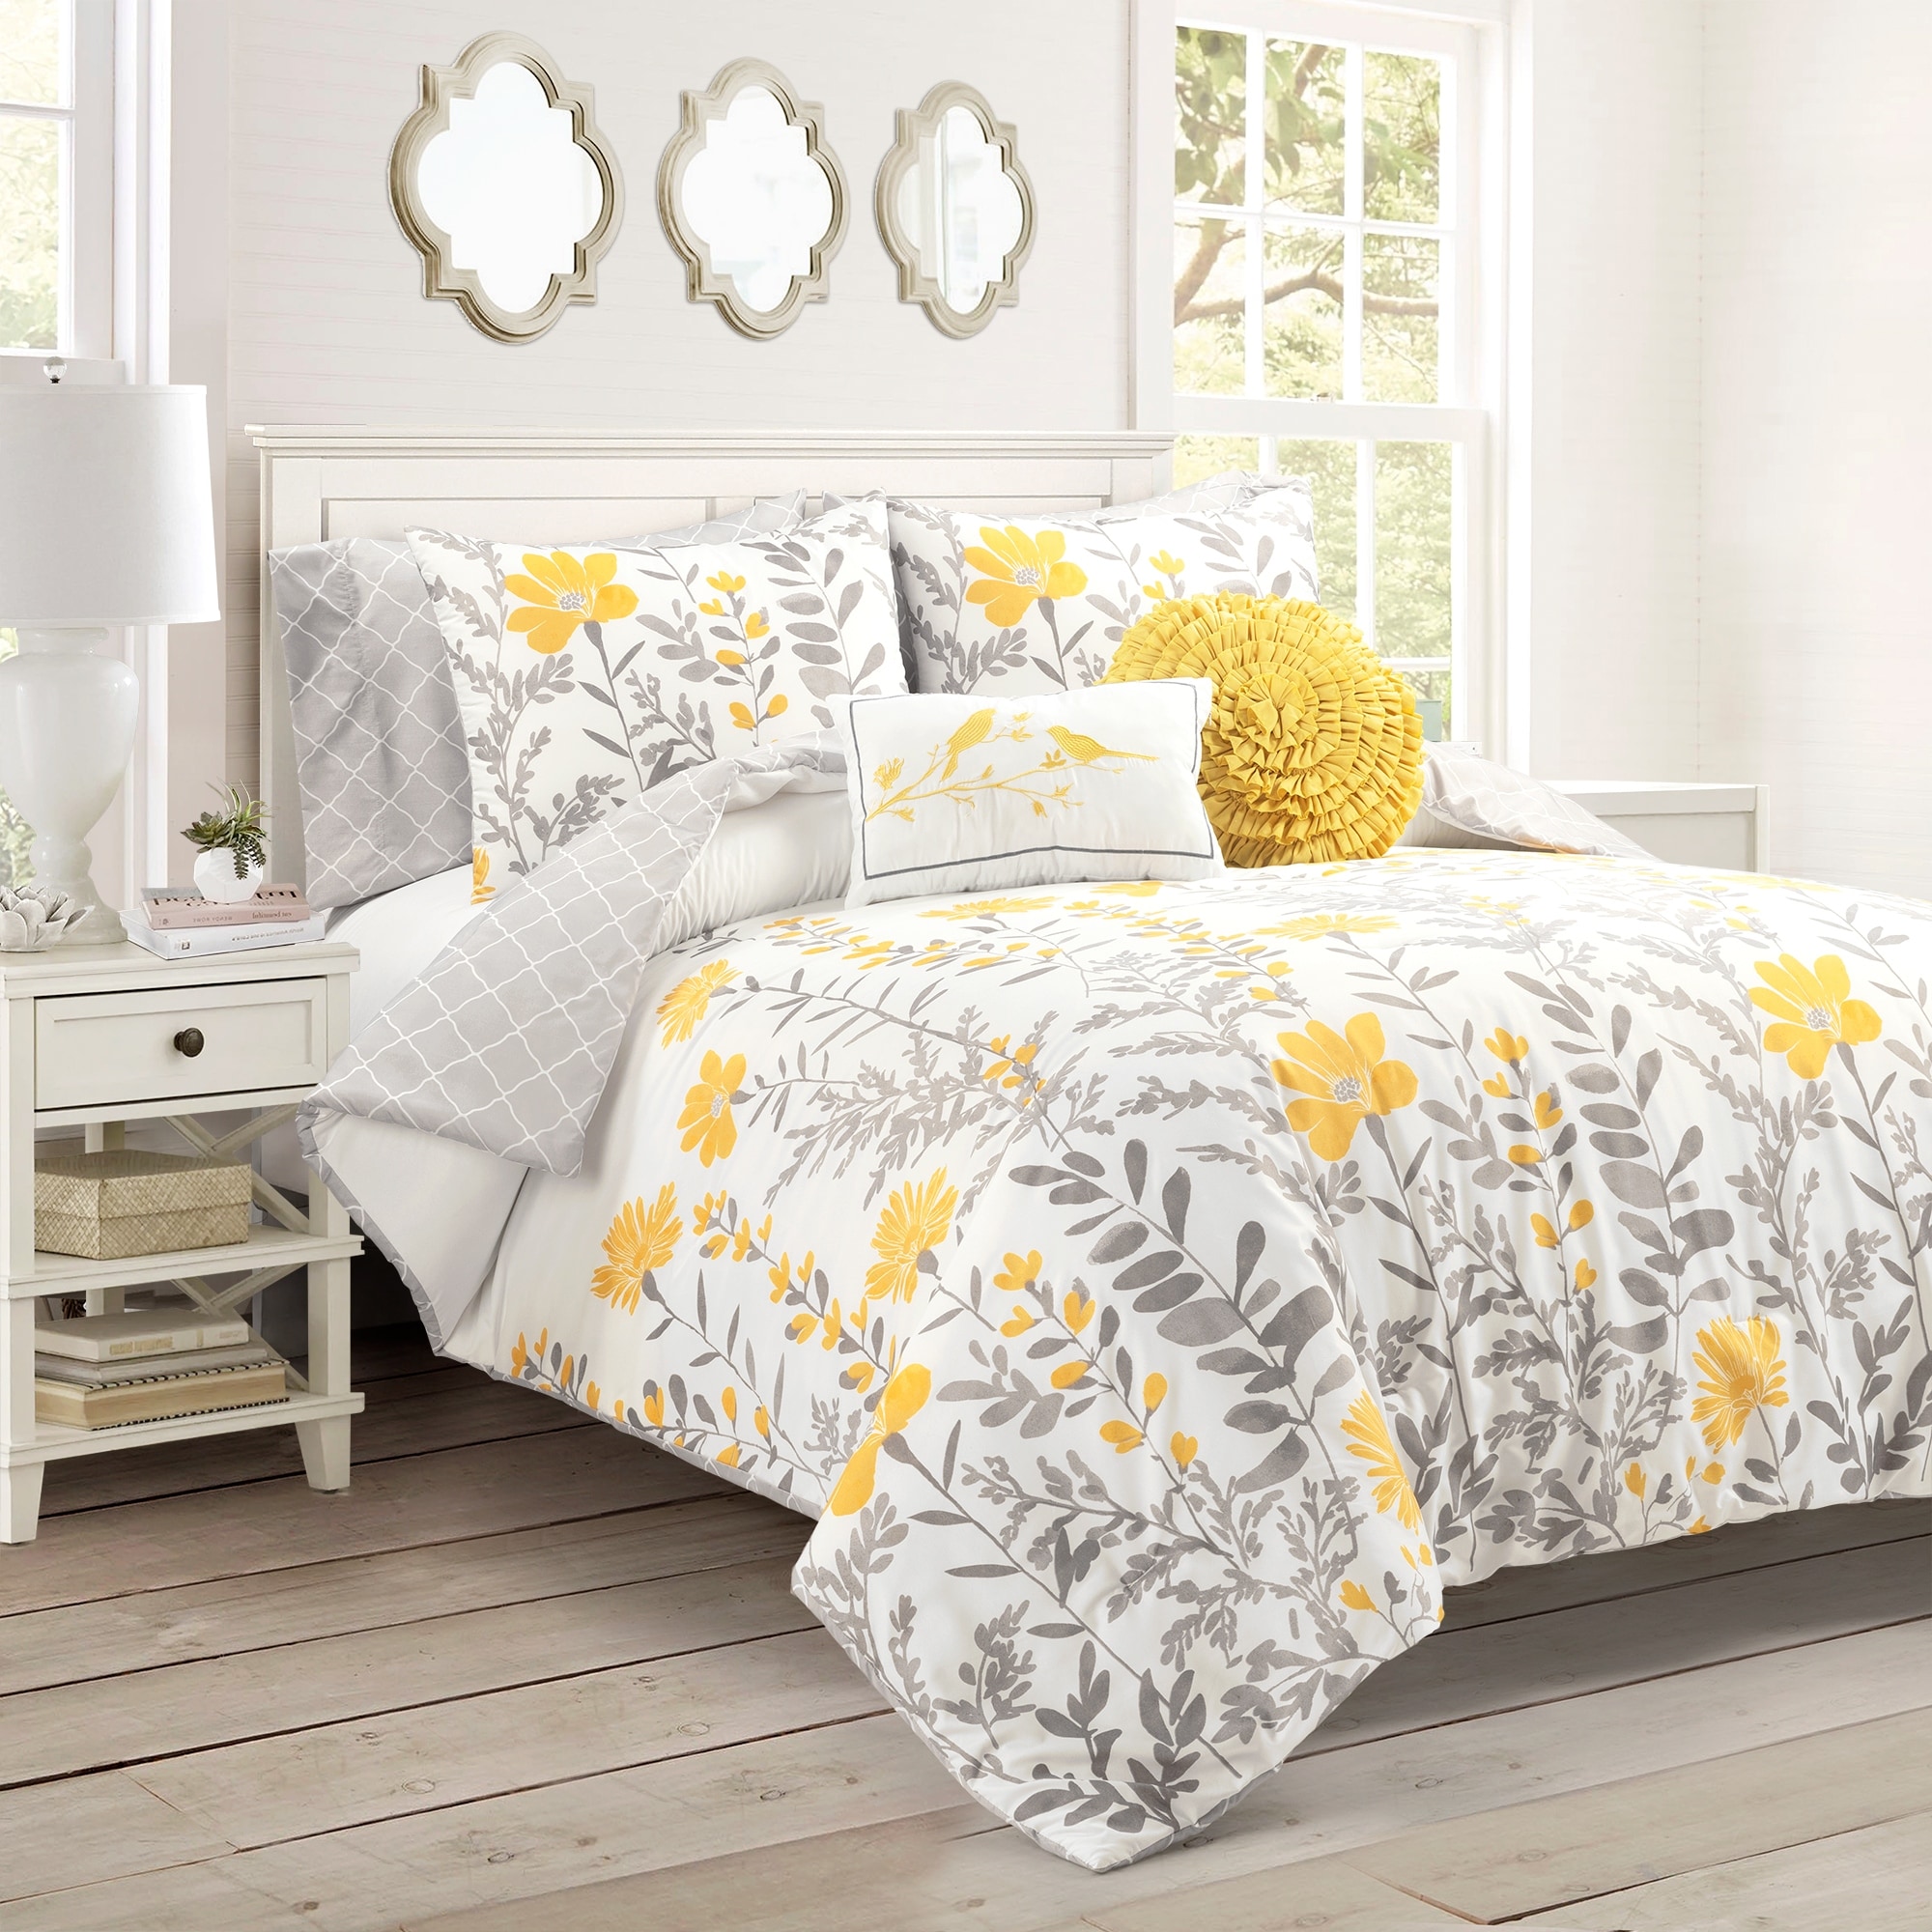 Farmhouse, Floral Comforters and Sets - Bed Bath & Beyond